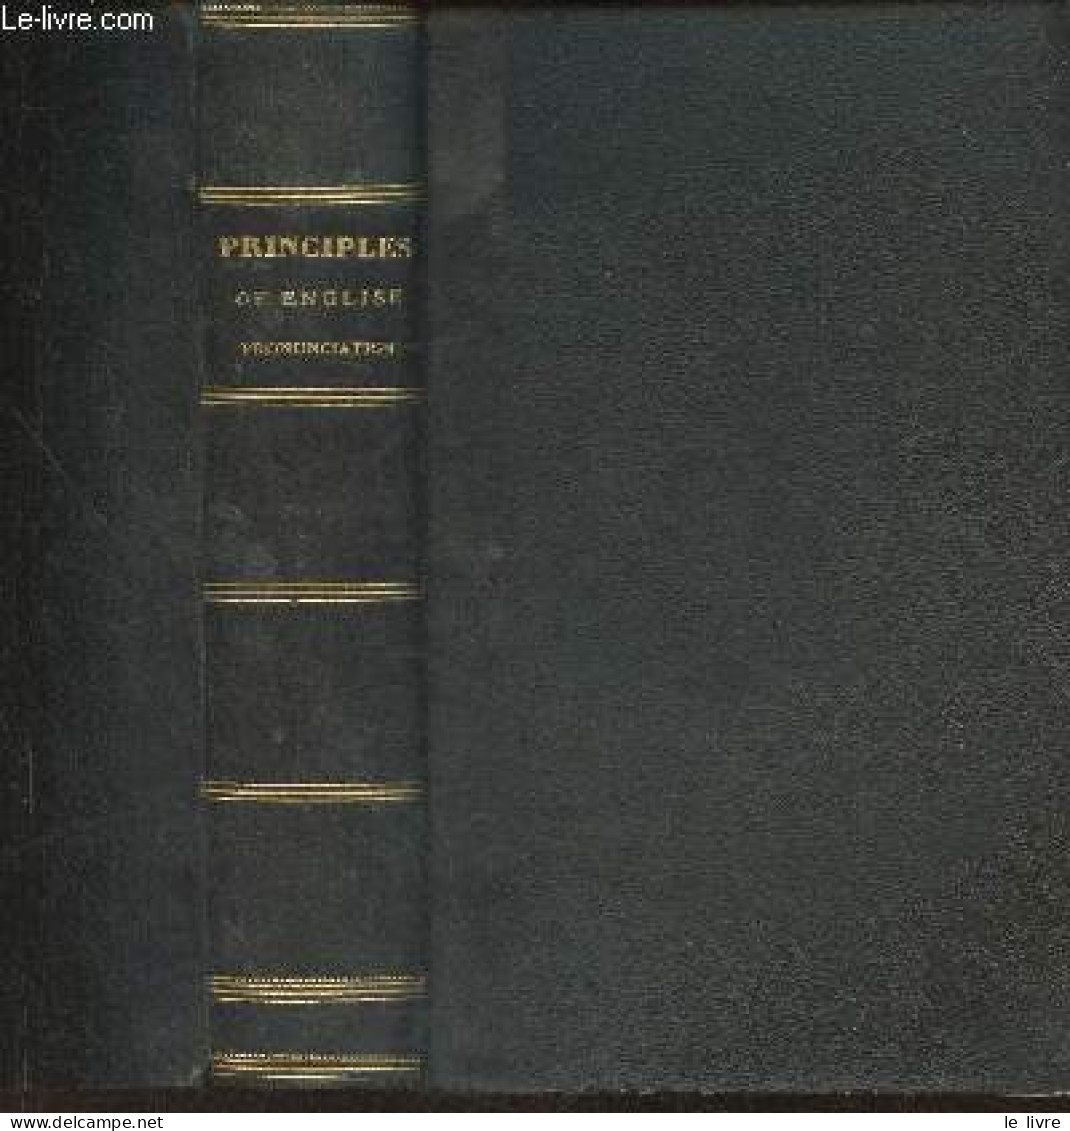 A Critical Pronouncing Dictionary And Expositor Of The English Language To Xhich Are Prefixed Principles Of English Pron - Woordenboeken, Thesaurus